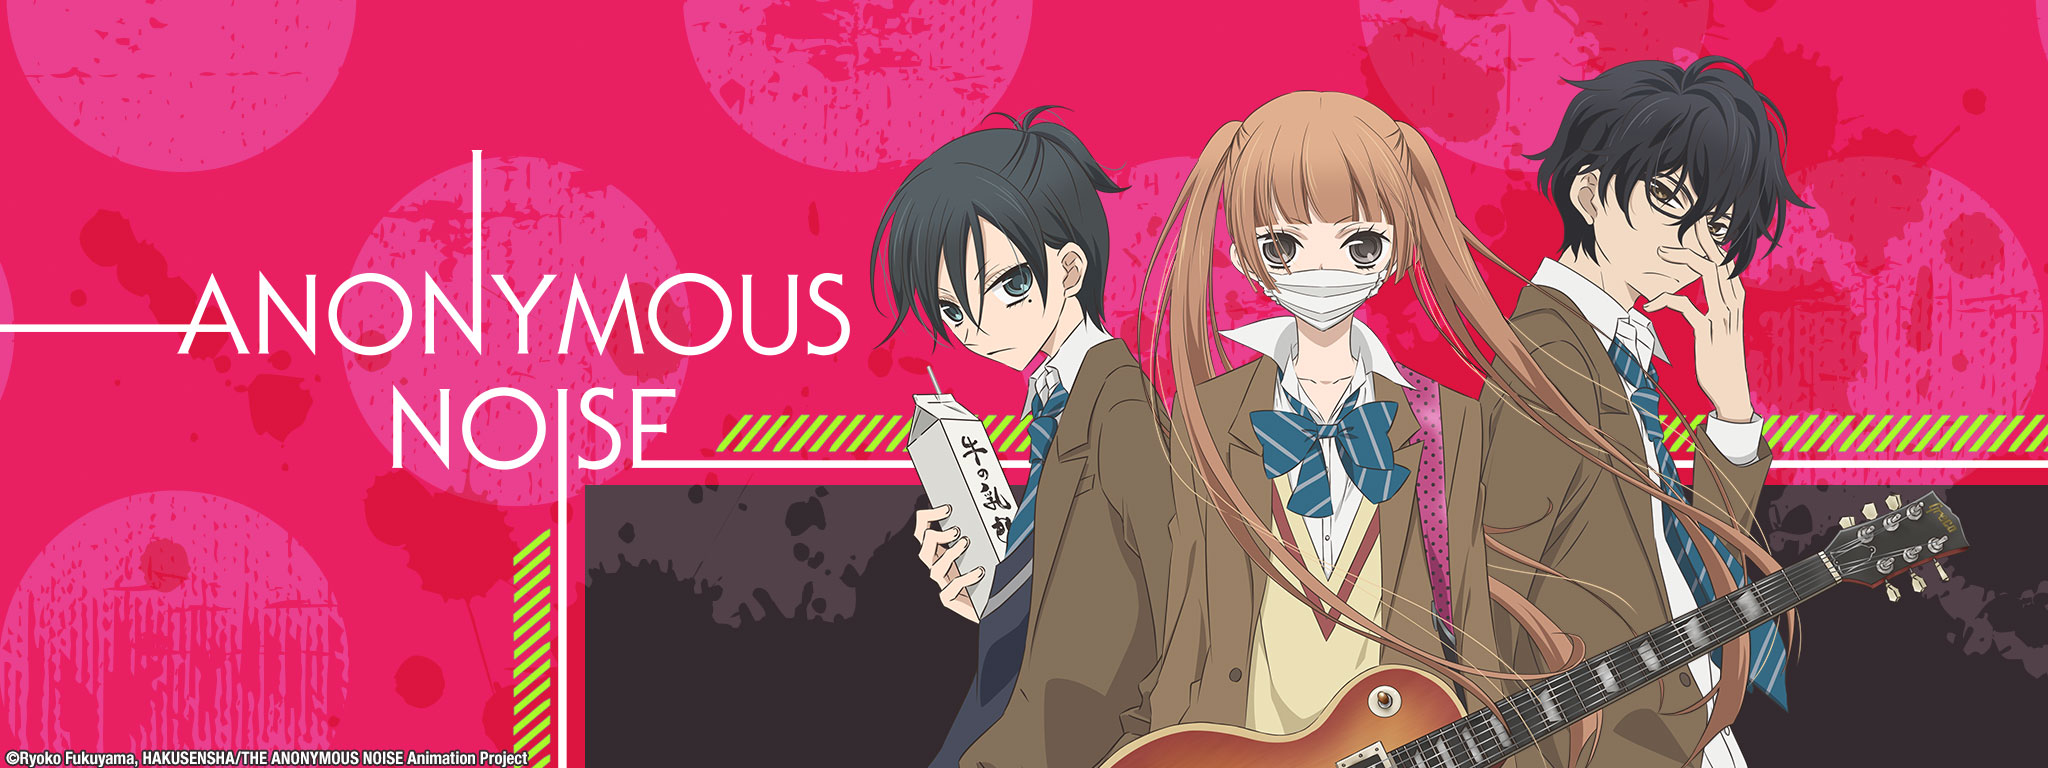 Title Art for Anonymous Noise